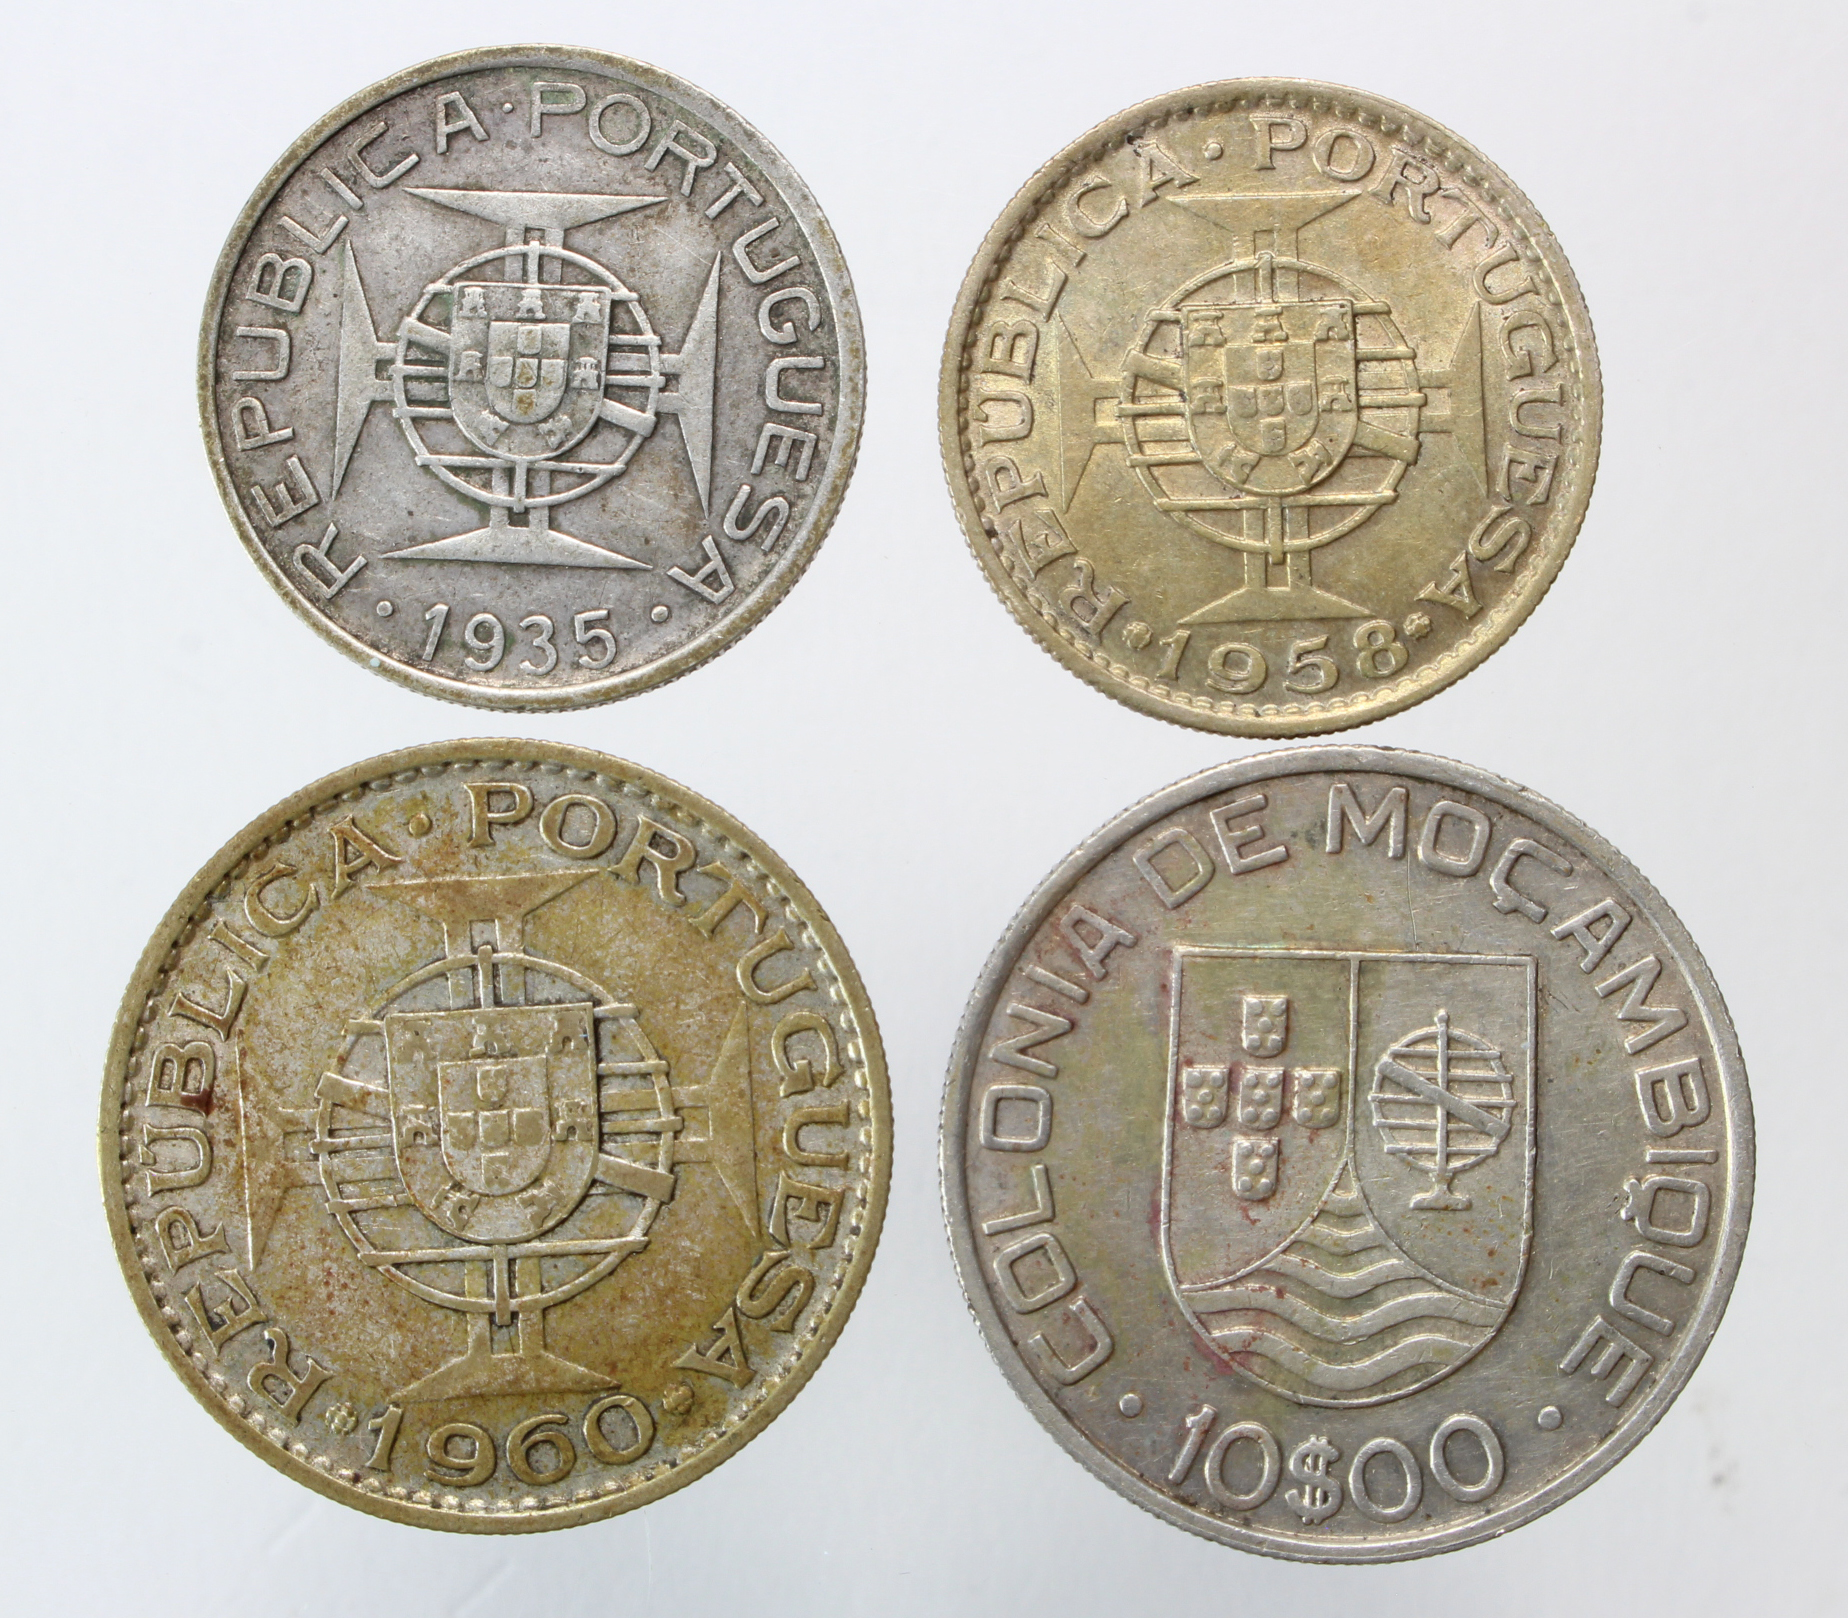 Portuguese Colonial silver (4): Mozambique: 5$00 1935 VF, 10$00 1936 nEF, and 20$00 1960 laquered - Image 2 of 2